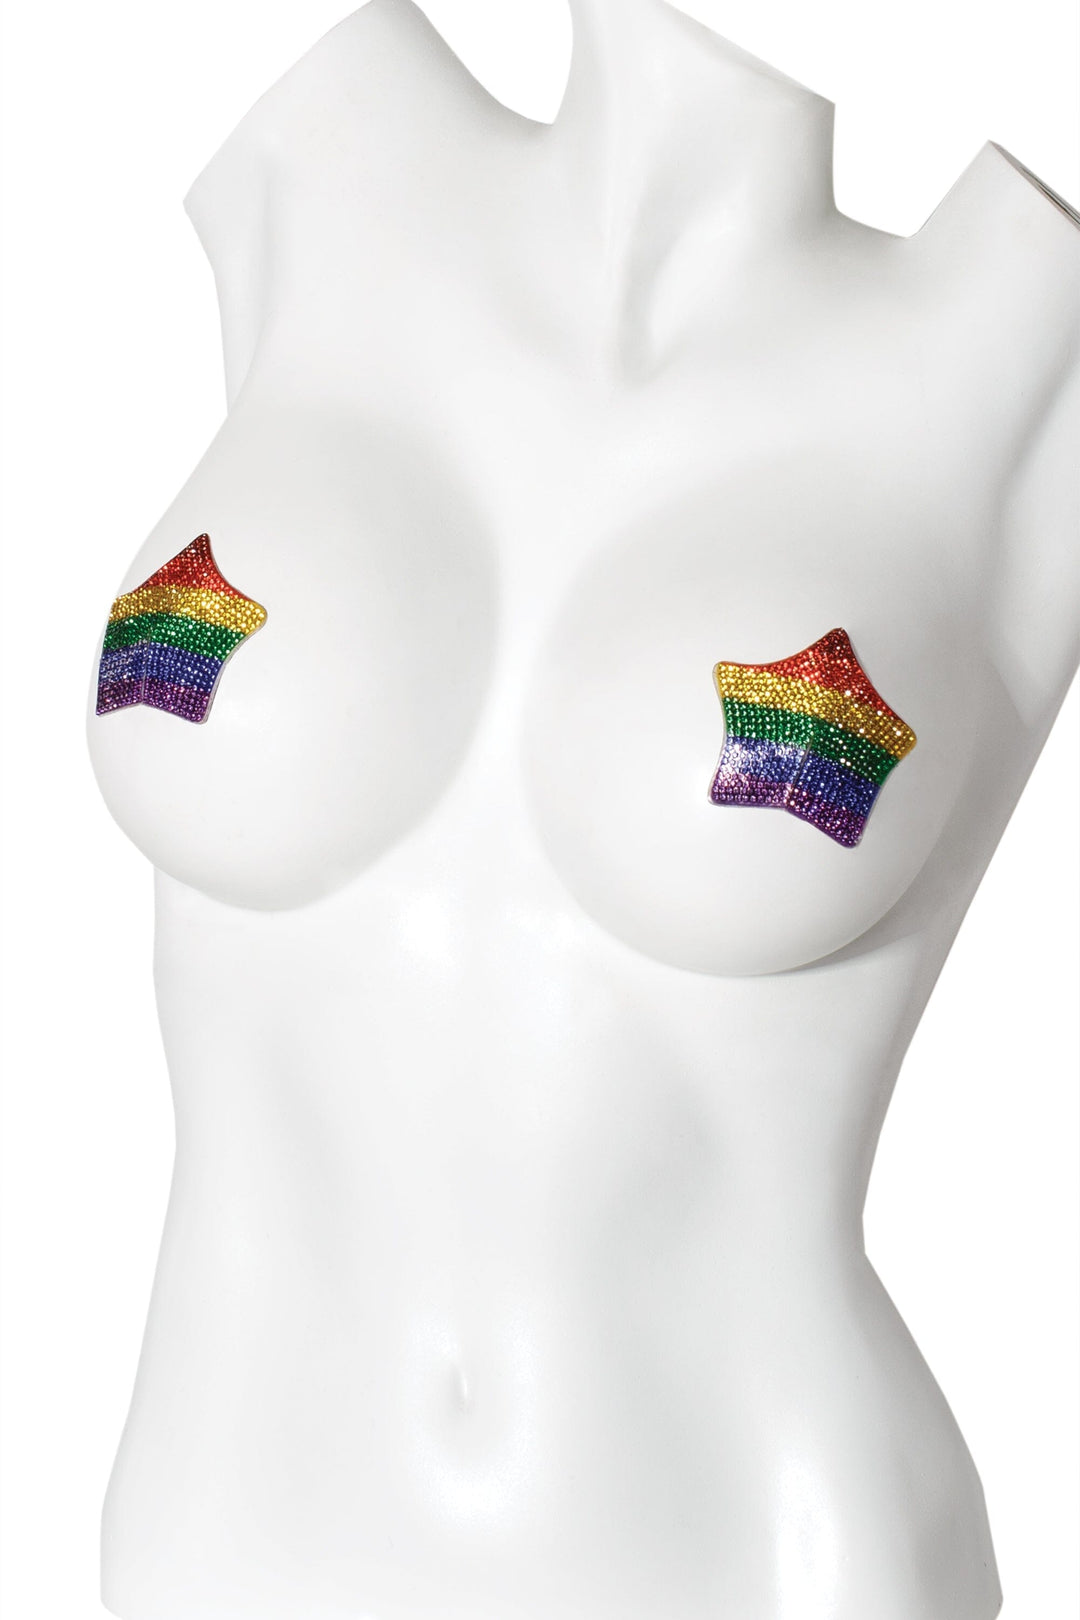 Rhinestone Star Rainbow Pasty With Reusable Self Adhesive Backing-Pasties-Coquette-Rainbow-O/S-SEXYSHOES.COM